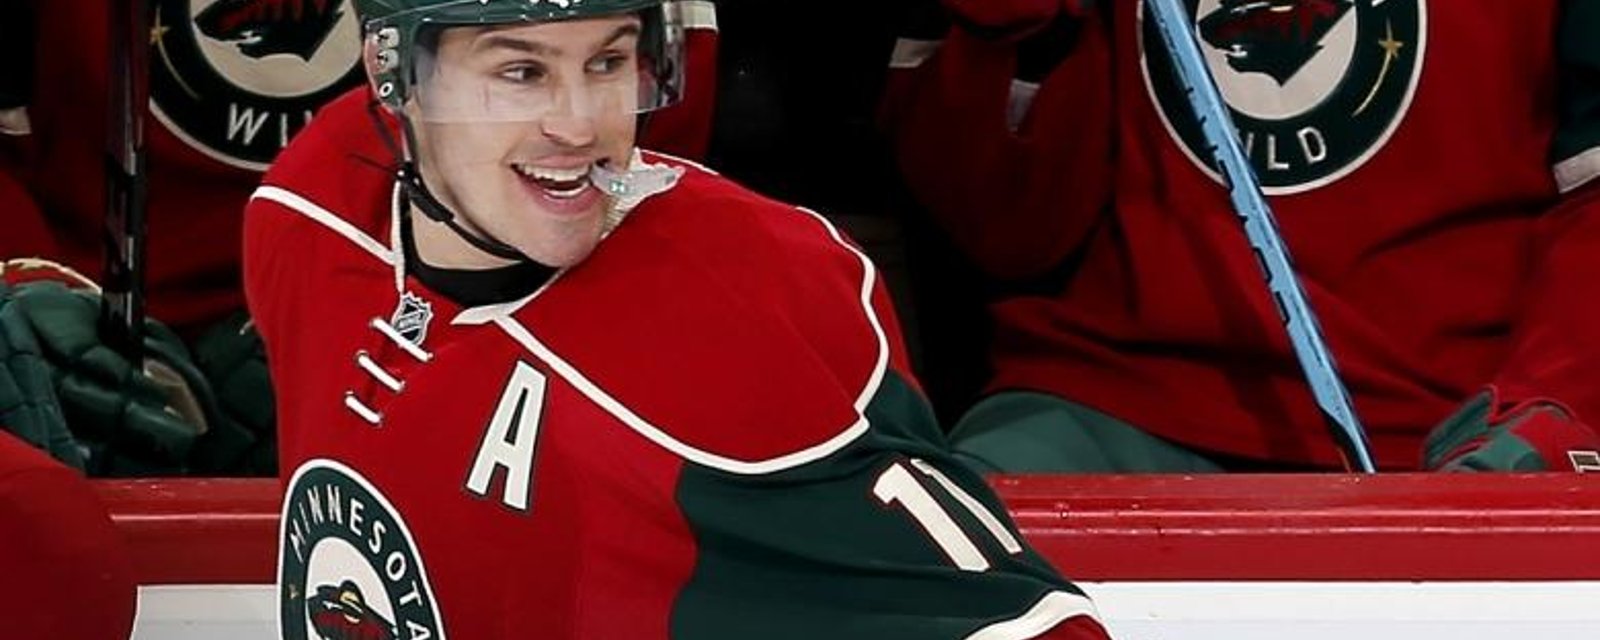 Zach Parise appears thrilled with the Wild's latest addition.